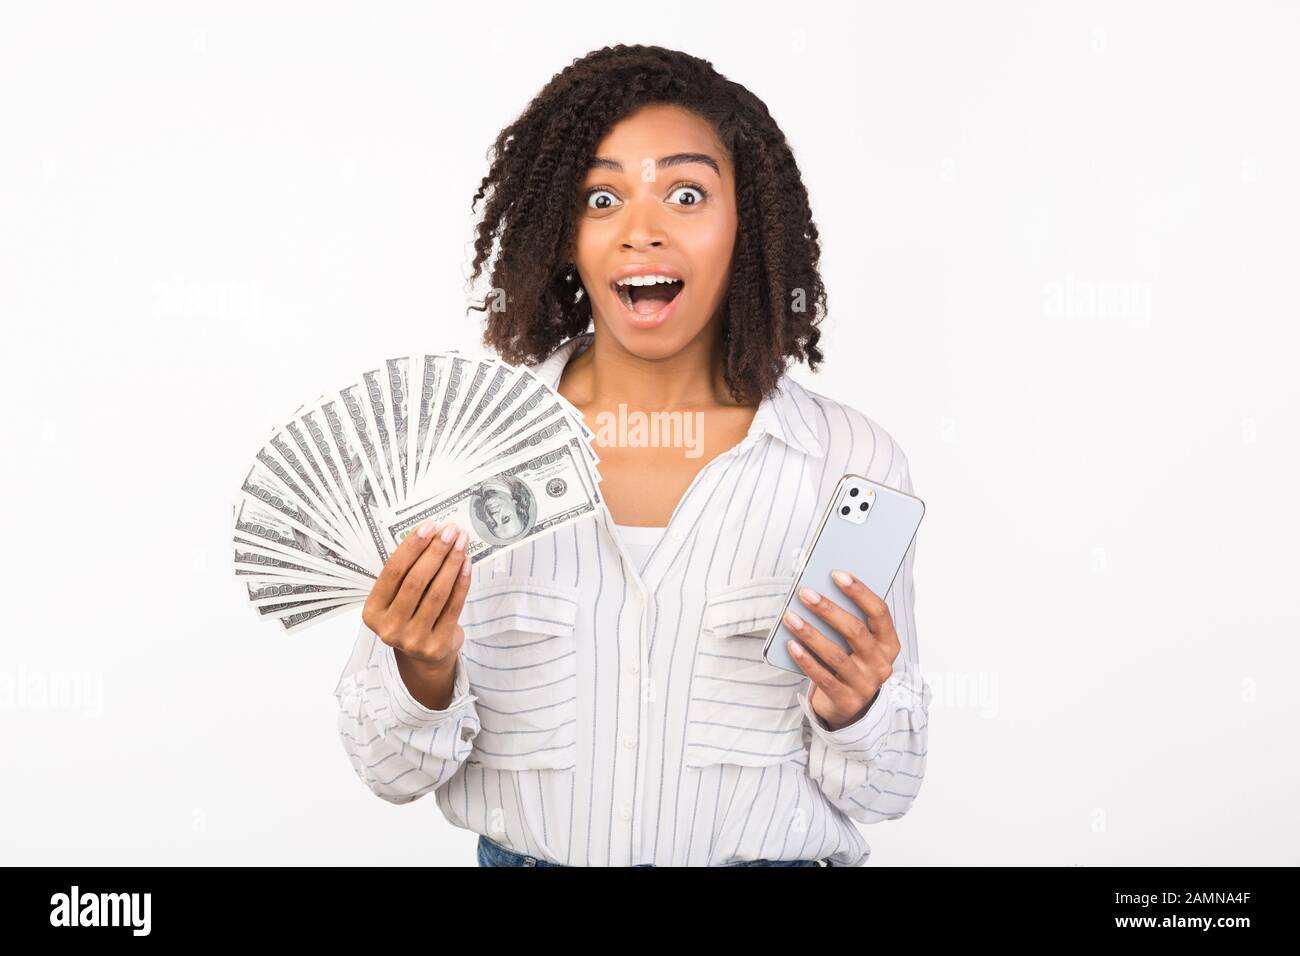 Excited black woman holding money and iPhone 11 Stock Photo